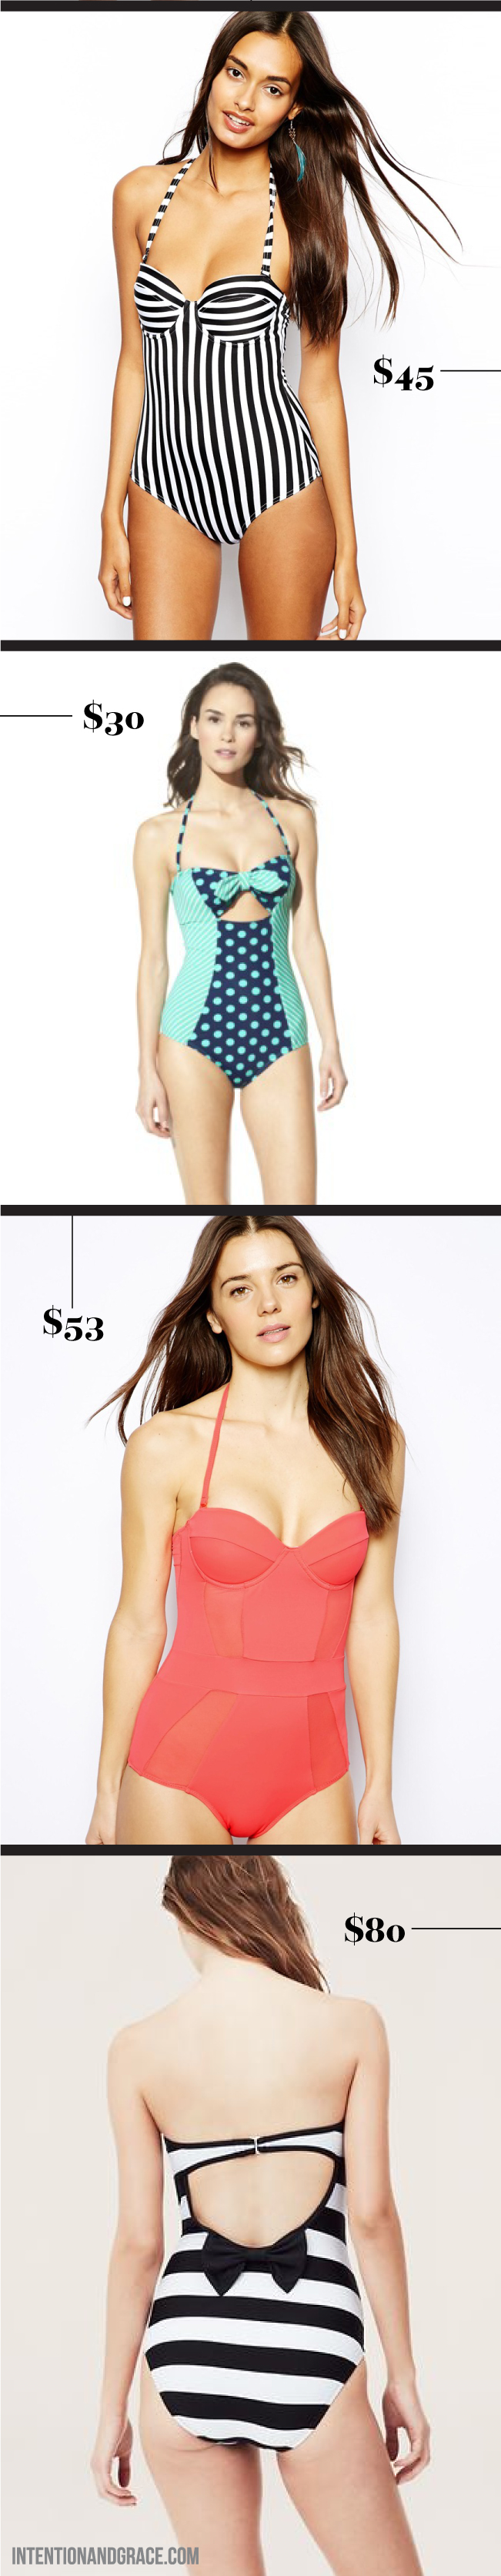 2014 Swimsuit trends for summe. Going for a One Piece, Tankini or Bikini, here are some great options.  |  Intentionandgrace.com